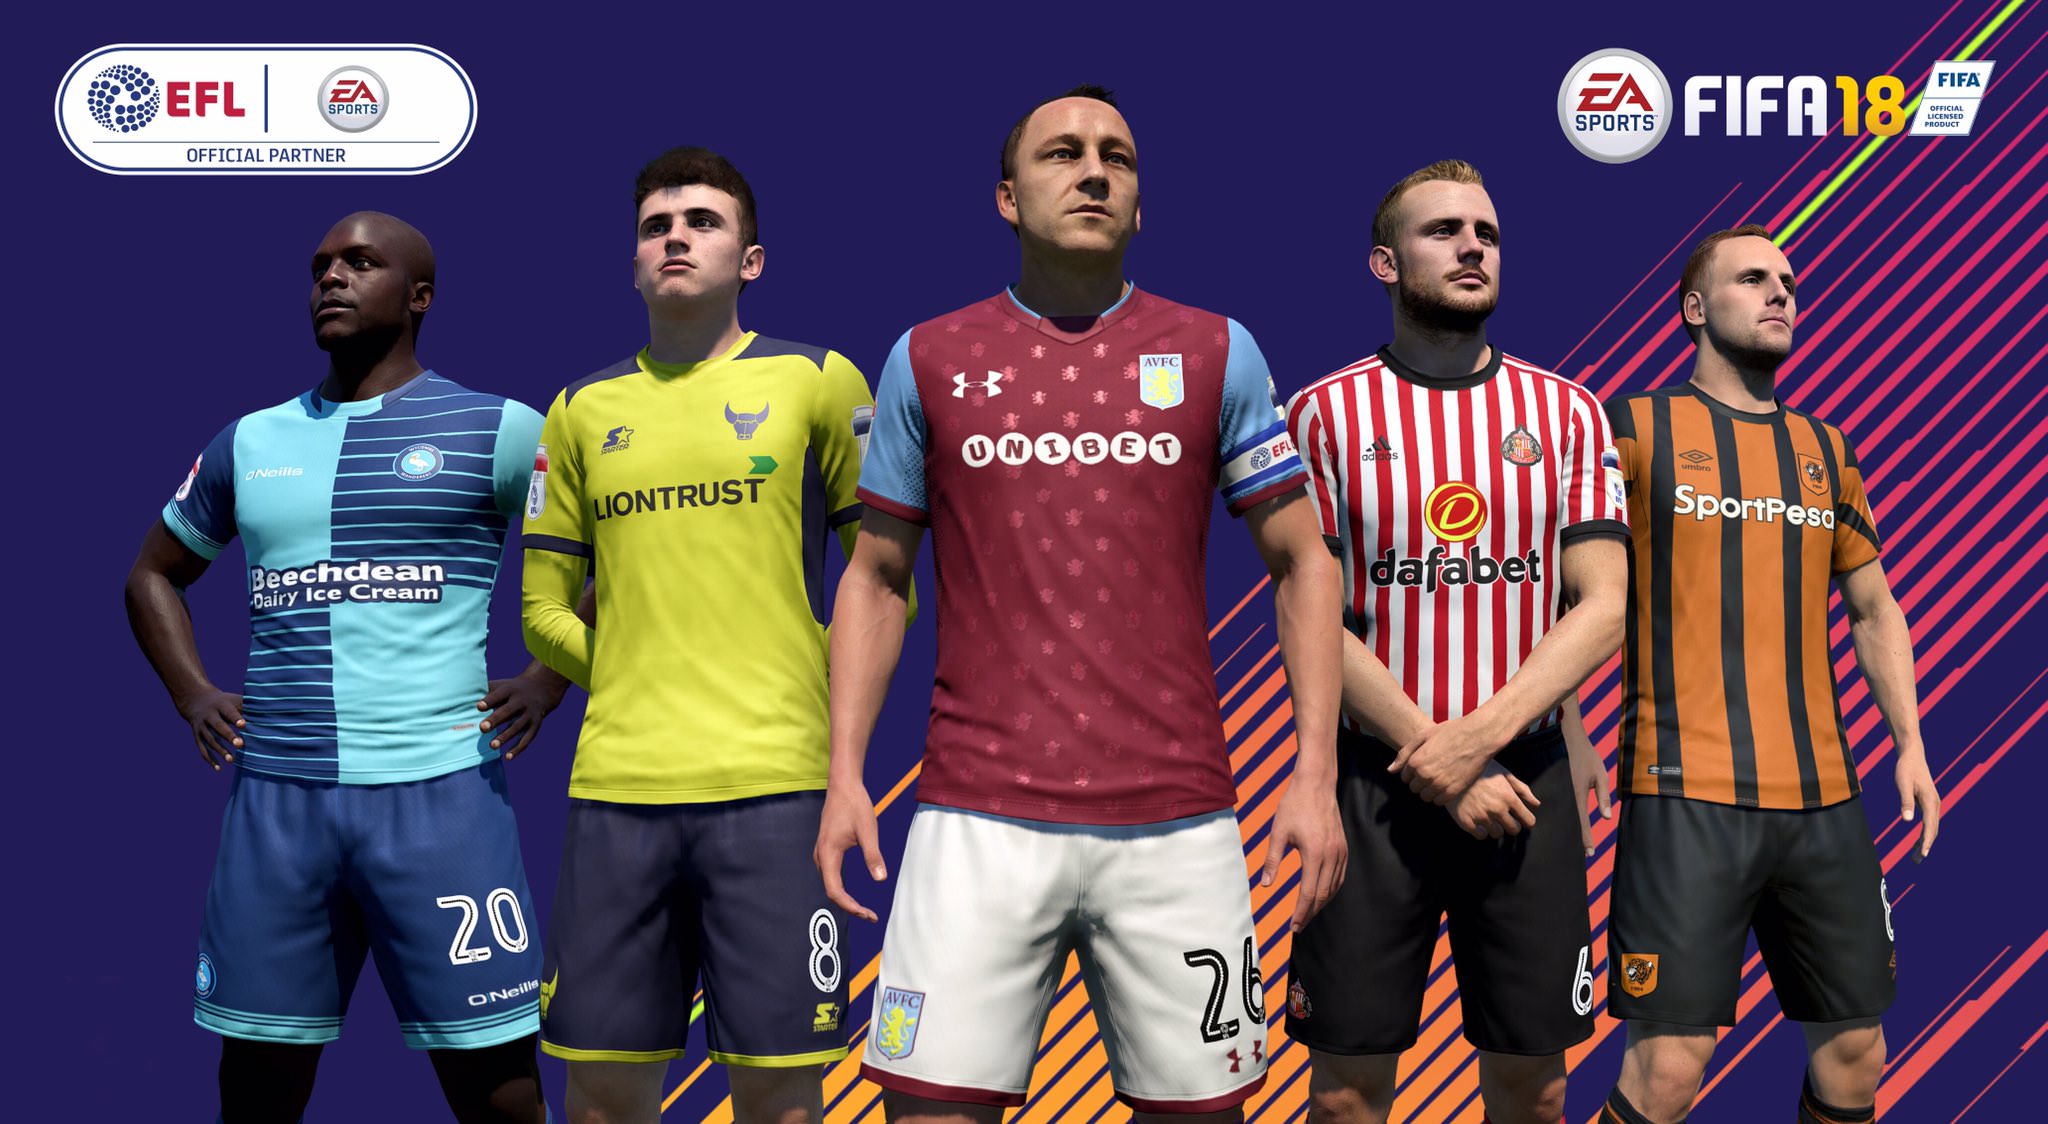 EA Sports Announces Official Partnership with EFL for FIFA 18